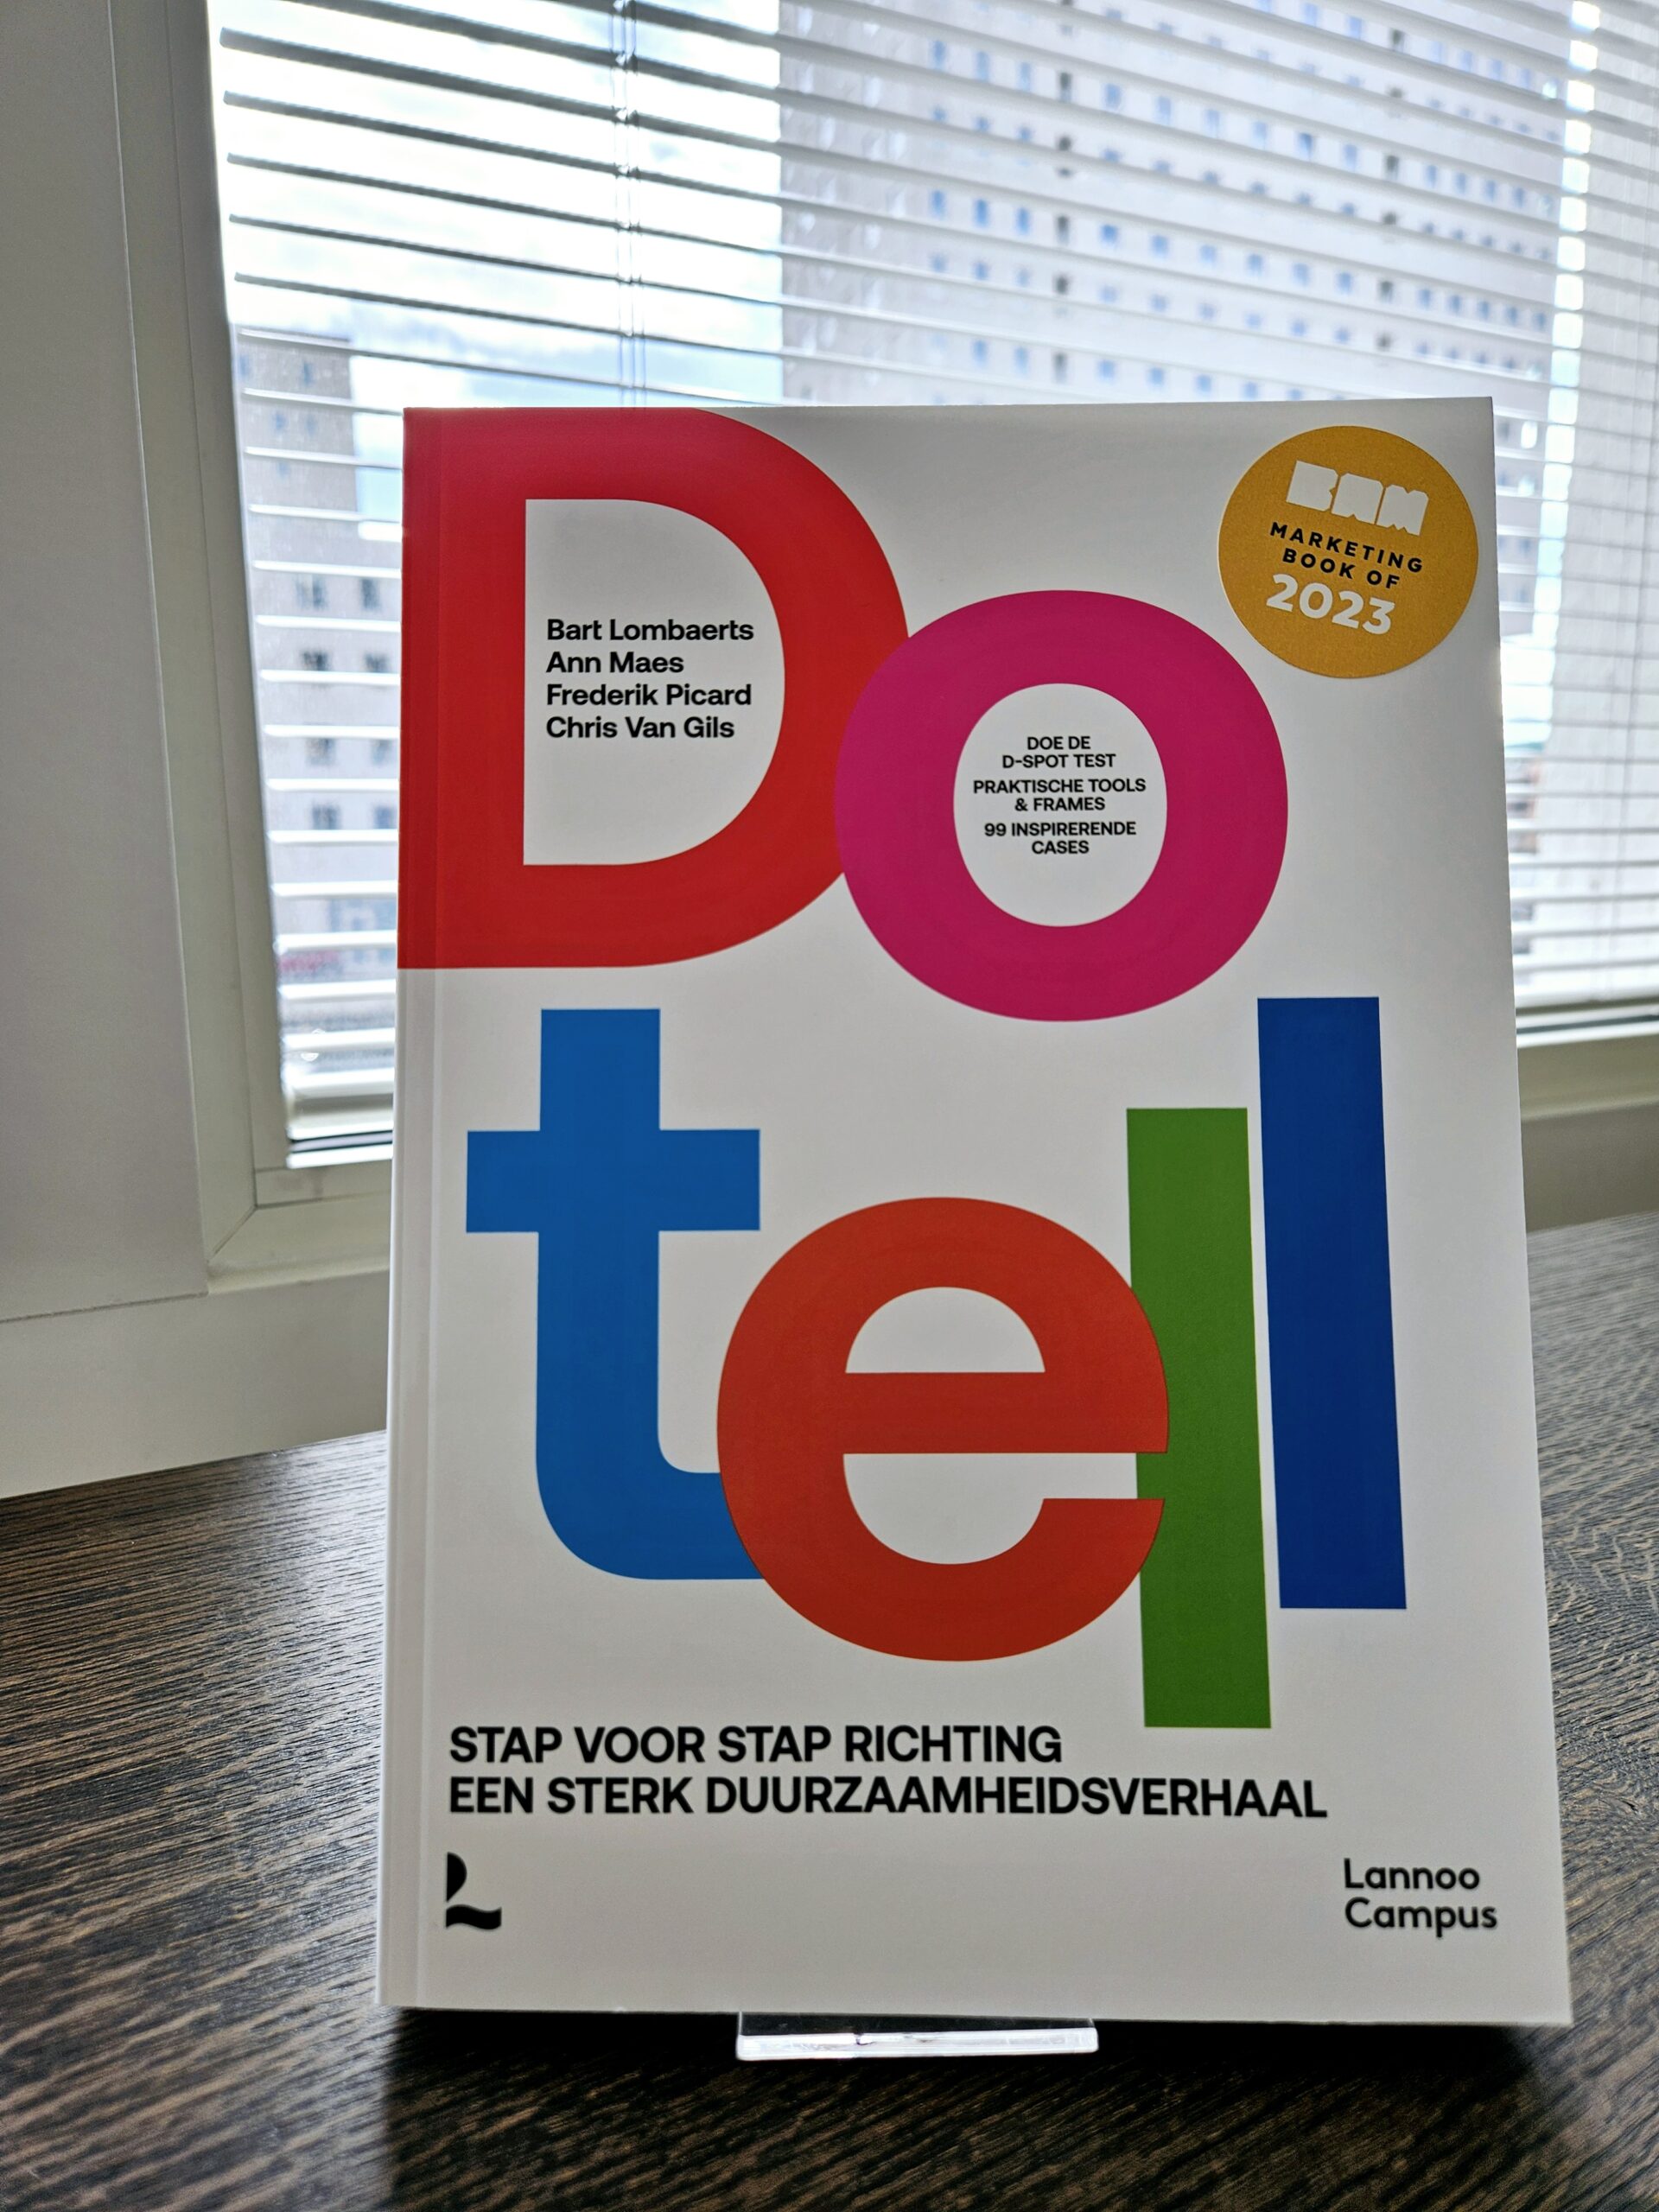 ‘Do tell’ marketing book of the year